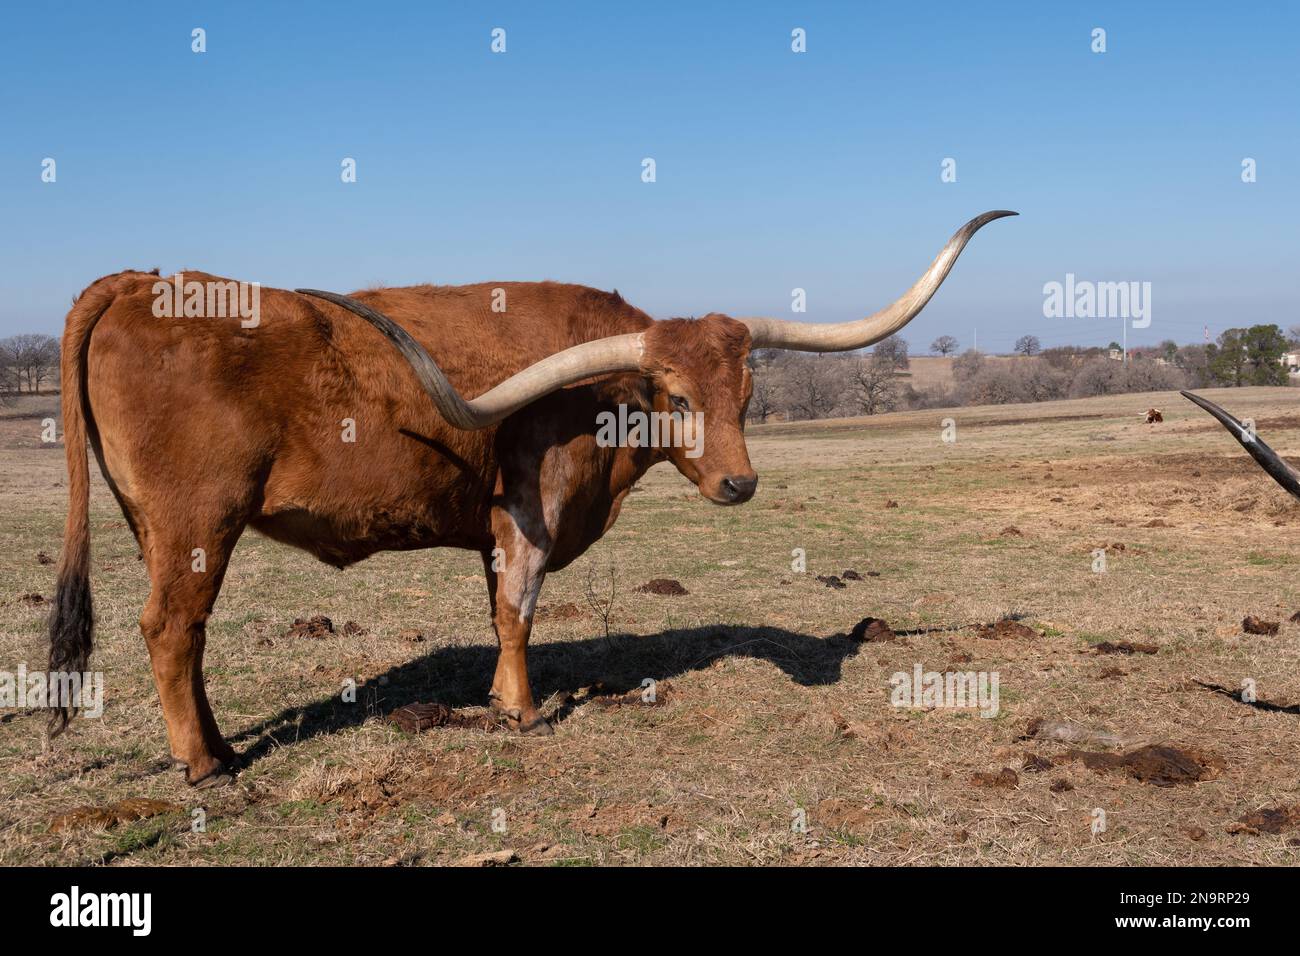 Profile of a large, brown, Longhorn bull with long, curved horns standing in a grassy ranch pasture on a sunny day in Texas. Stock Photo